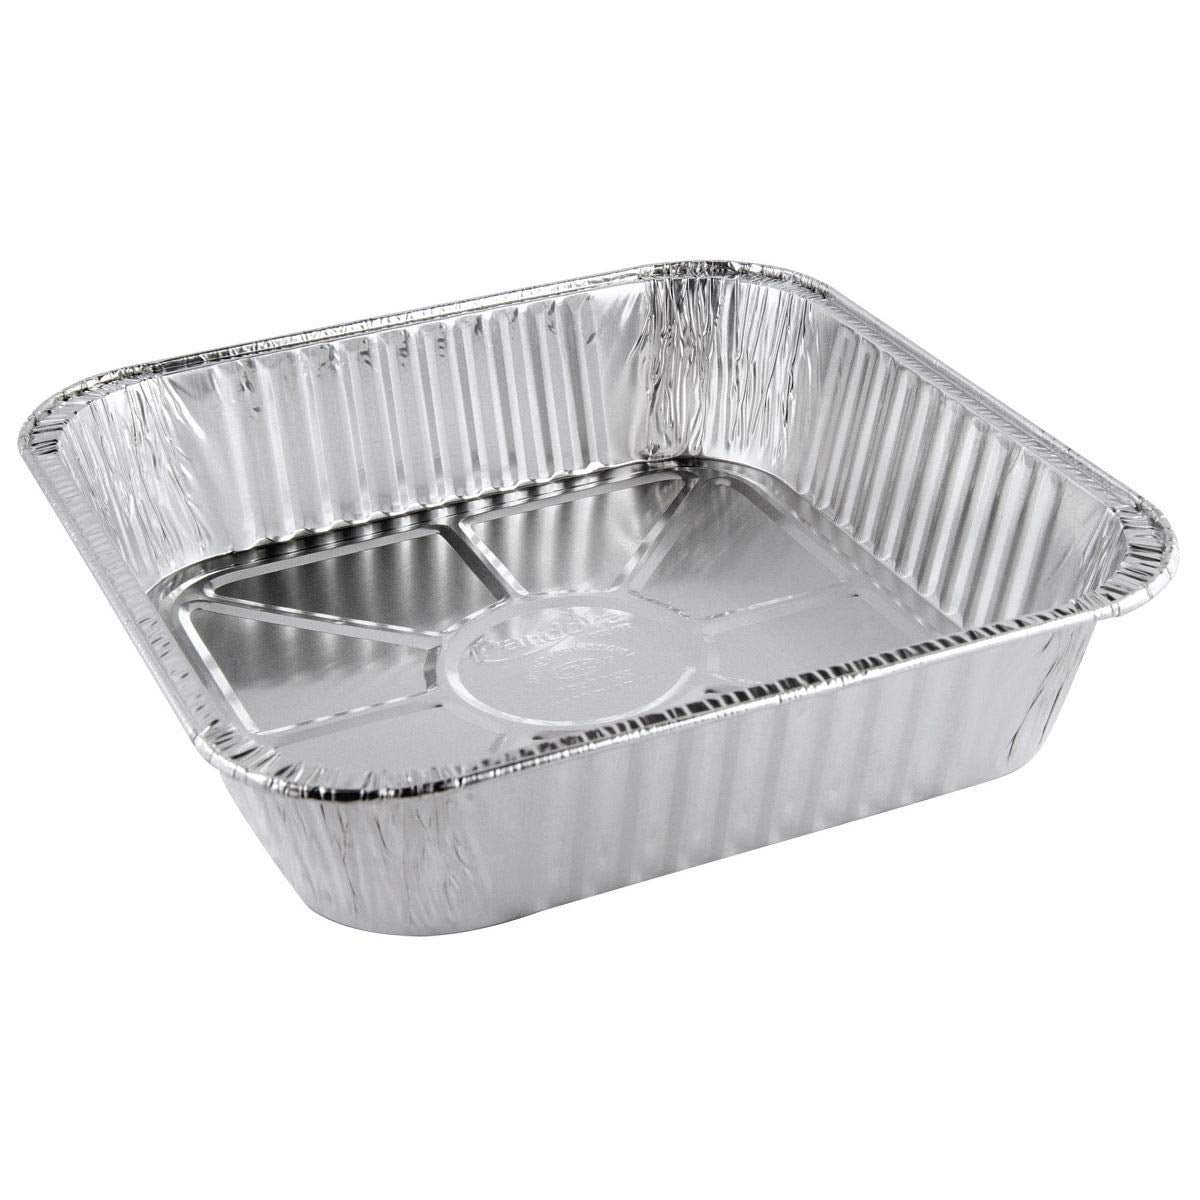 Brownie**Free Shipping** 8"x 8"Aluminum Foil Pan Disposable for Baking Pastries 